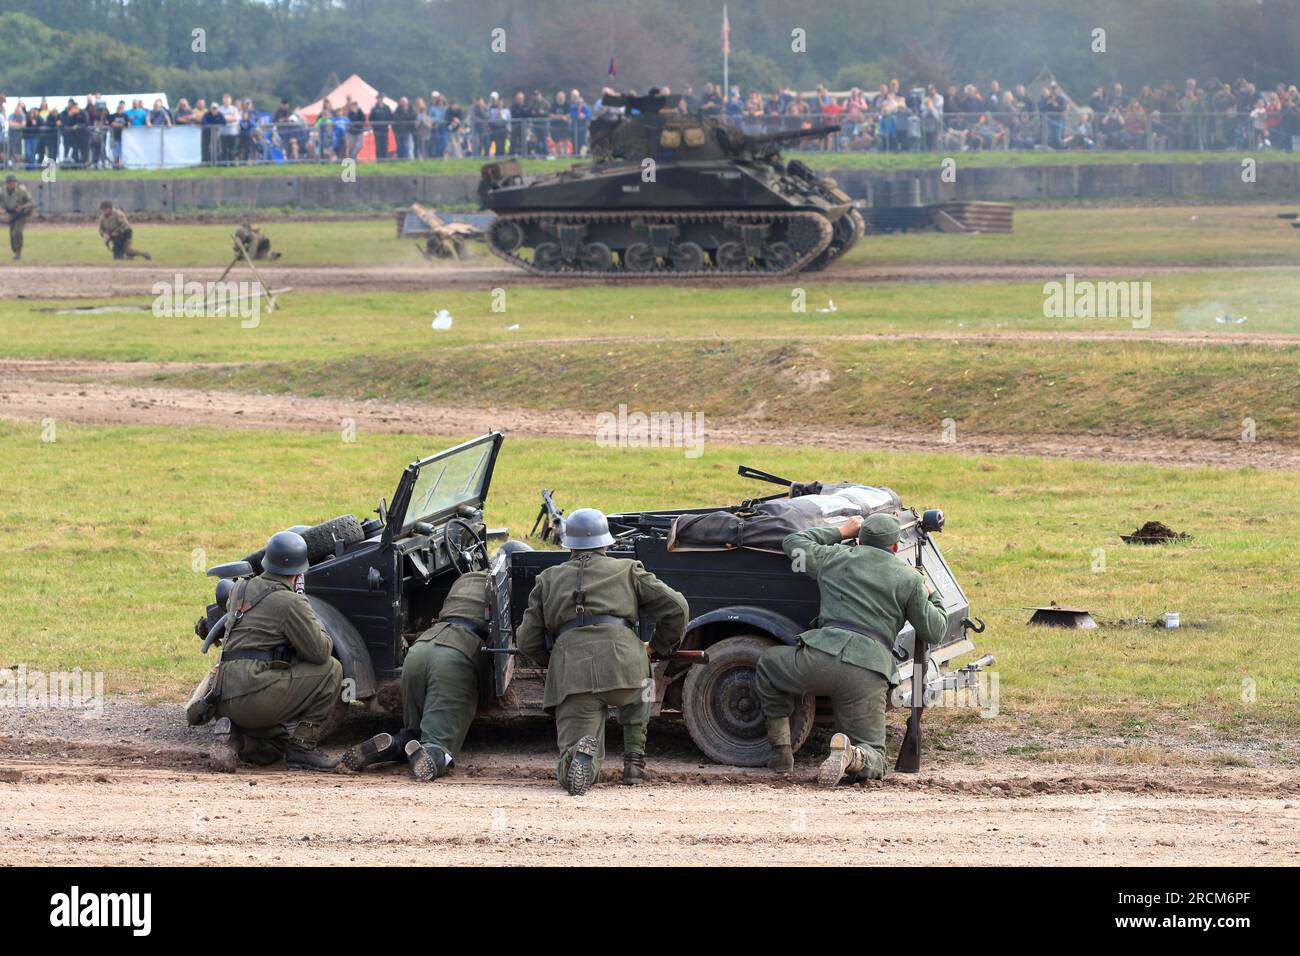 Historical reenactment of German Army soldiers behind a jeep with a tank in the background in the Tankfest main arena display at Bovington Tank Museum Stock Photo